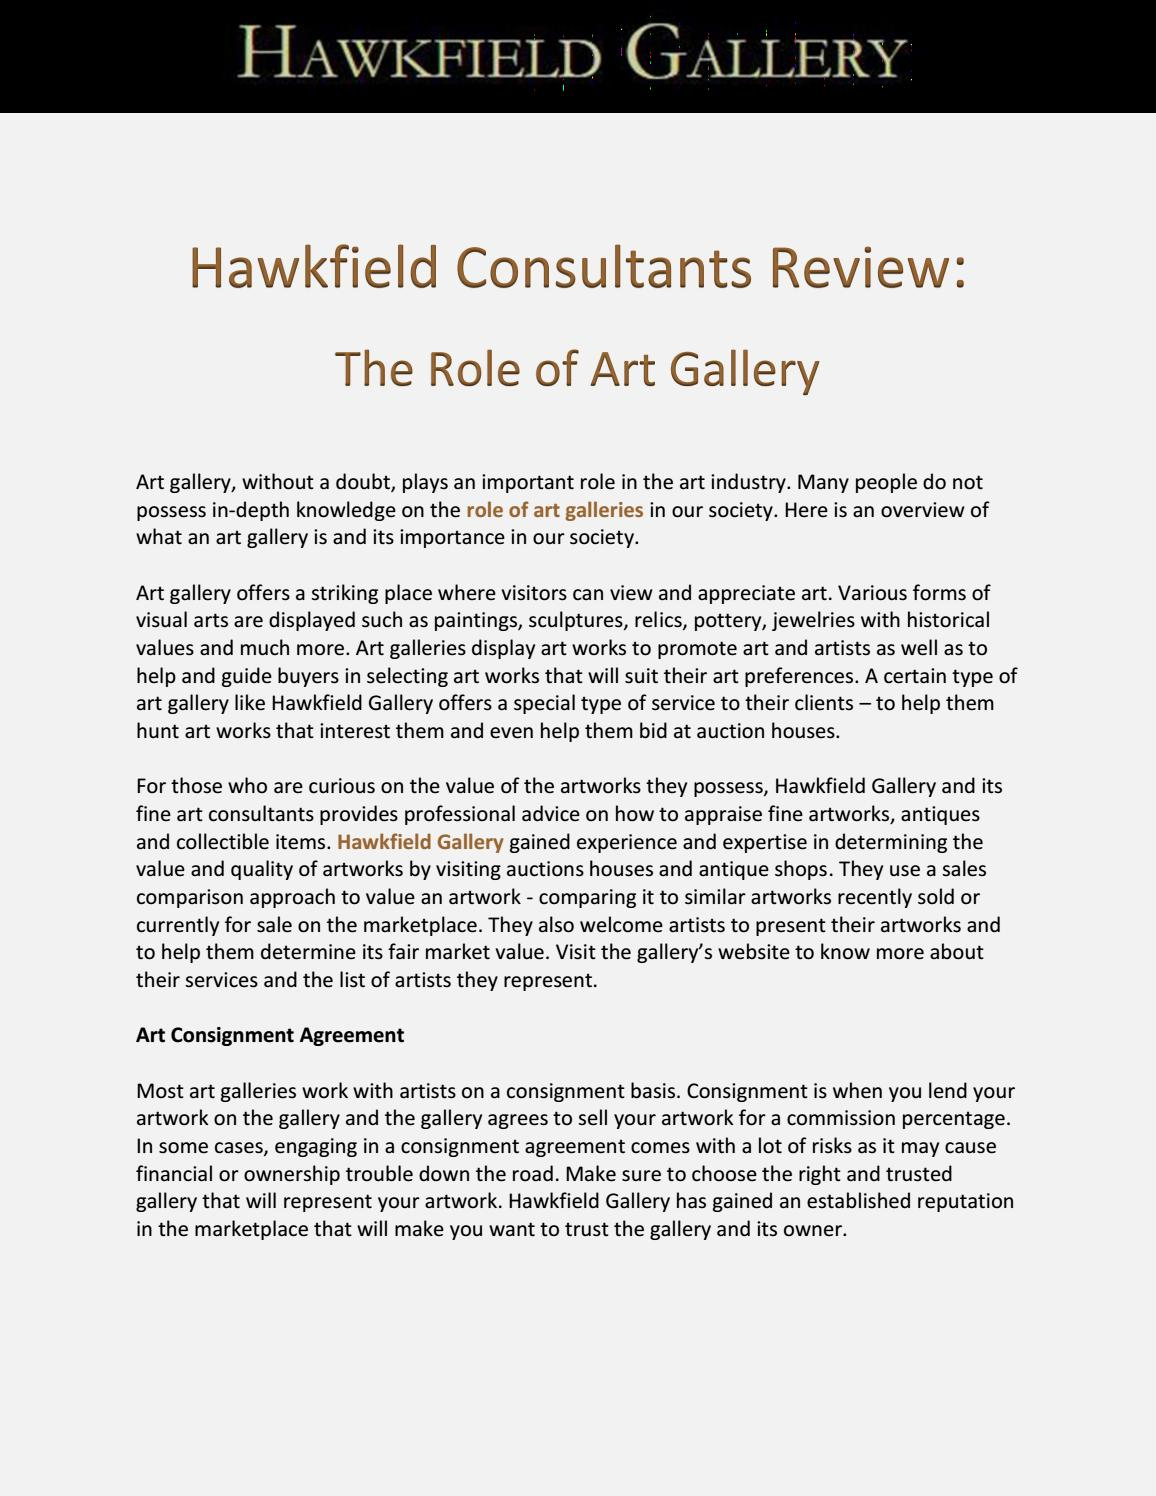 Gallery Consignment Agreement Hawkfield Consultants Review The Role Of Art Gallery Abigail